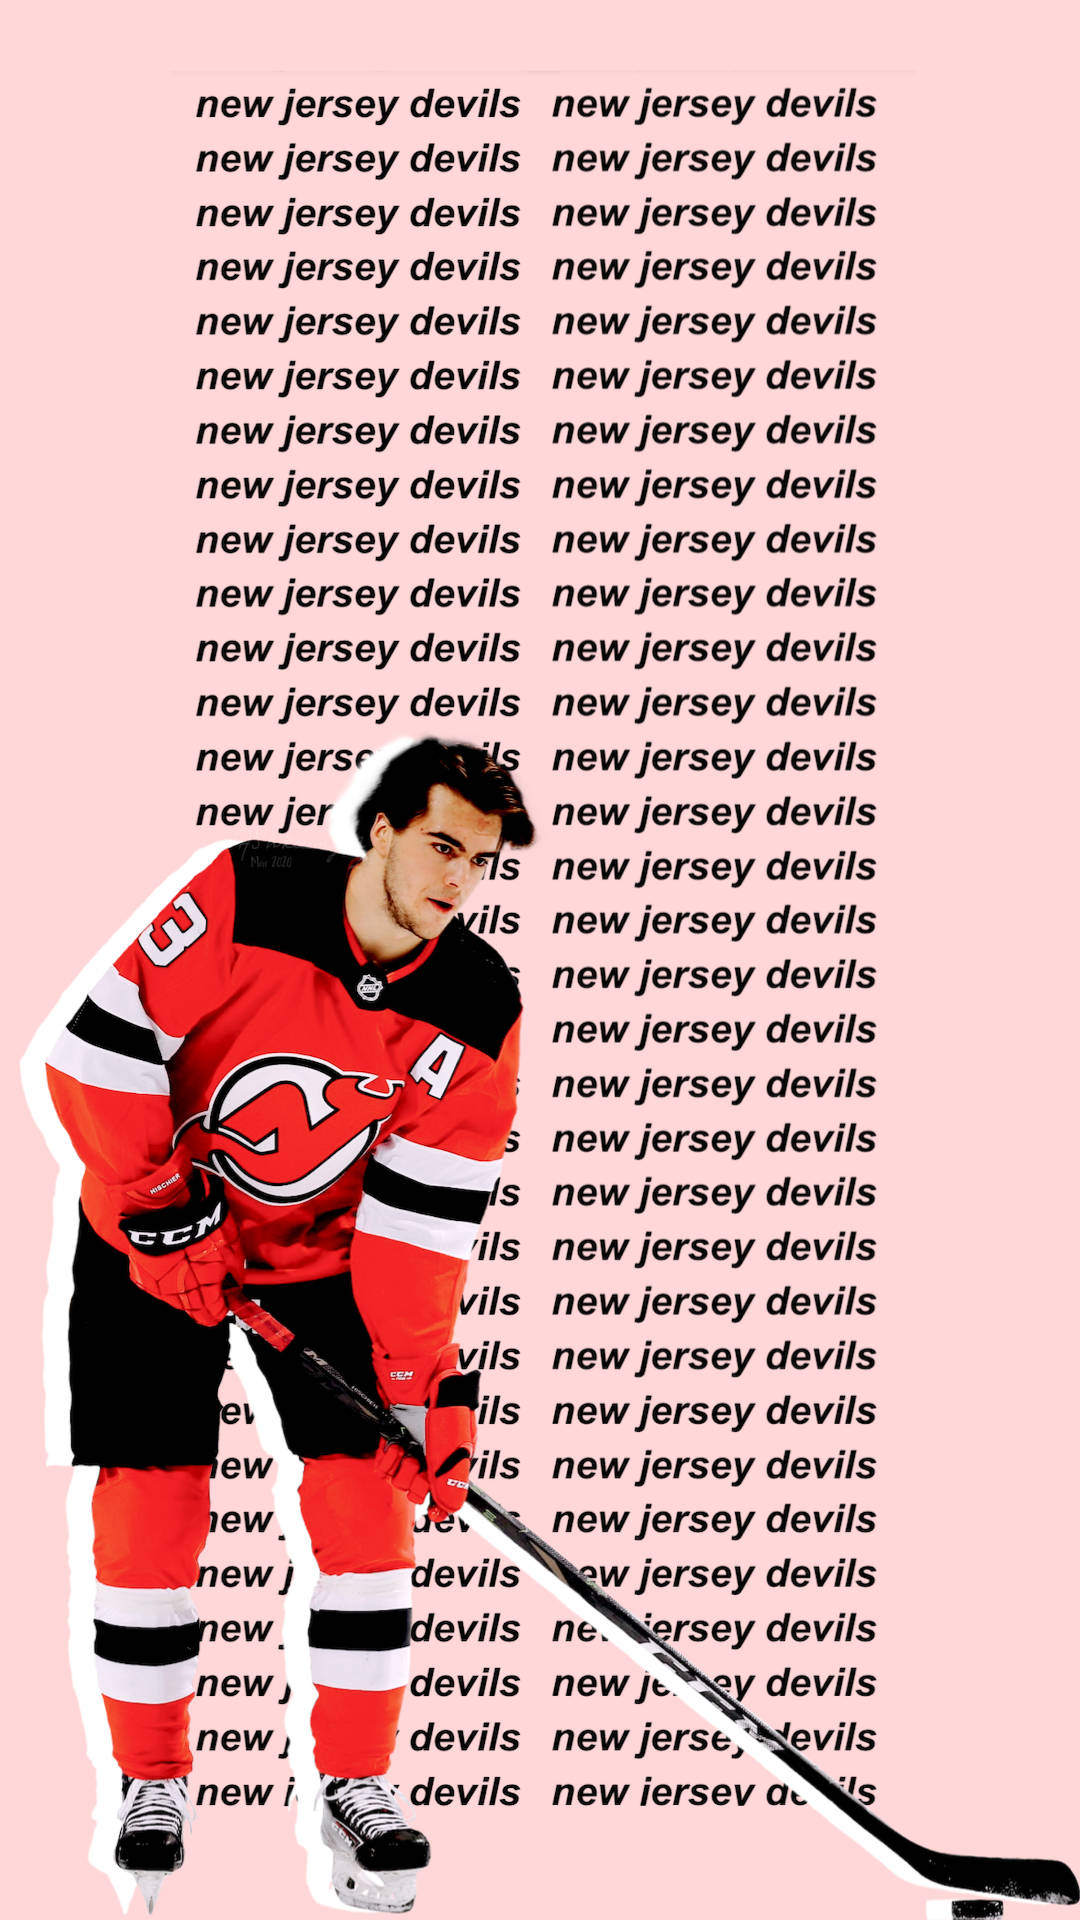 Nicohischier New Jersey Devils Could Be Translated To German As 